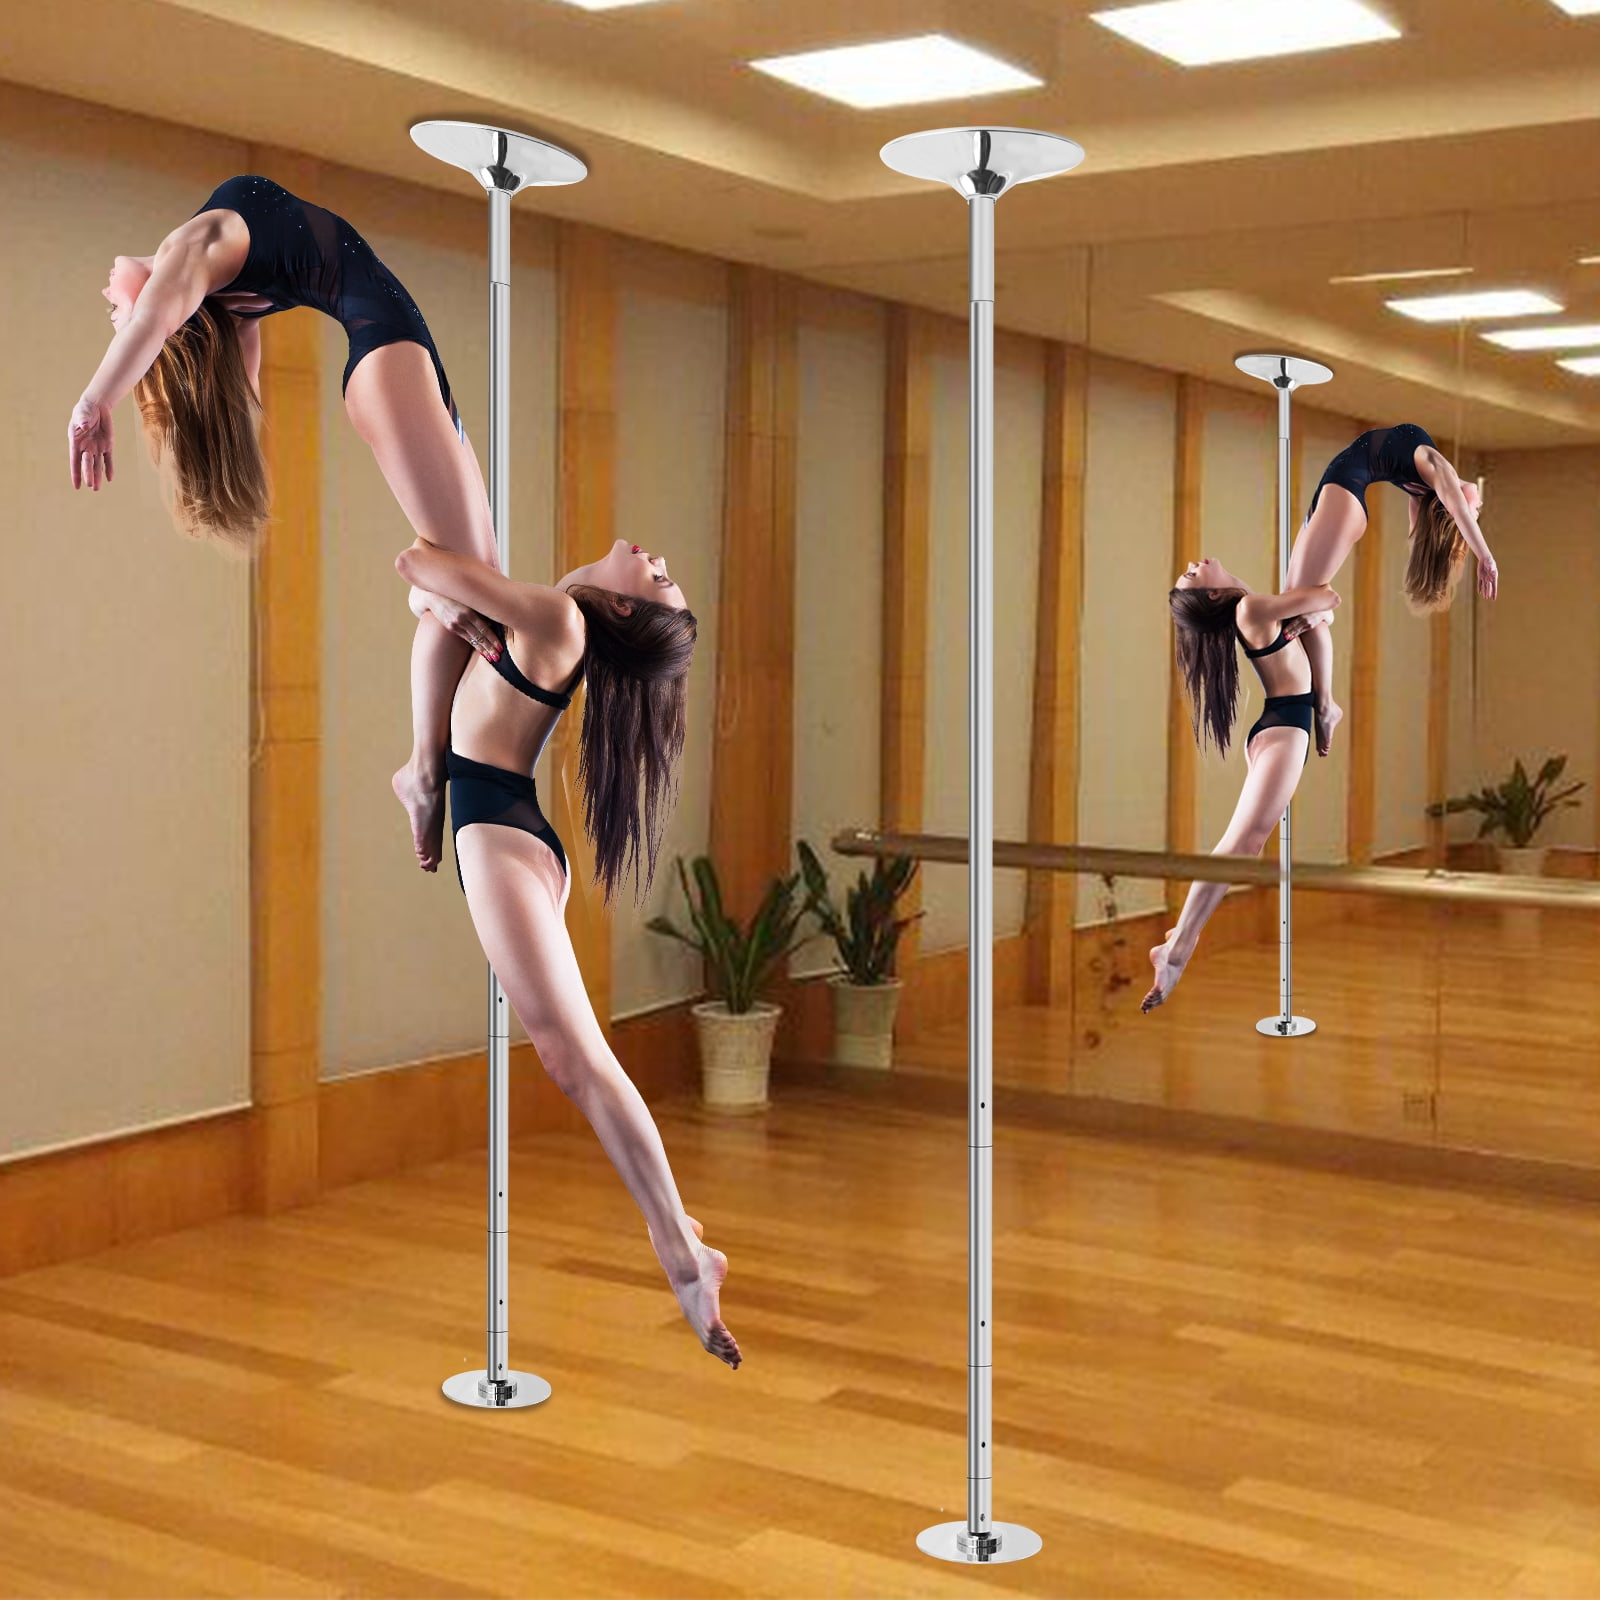 Beginner and Professional Tripper Voilamrt Stripper Dancing Pole for Home Spinning Static Dance Pole Removable for Fitness Apartment Club Party Pub Portable Pole Dance 